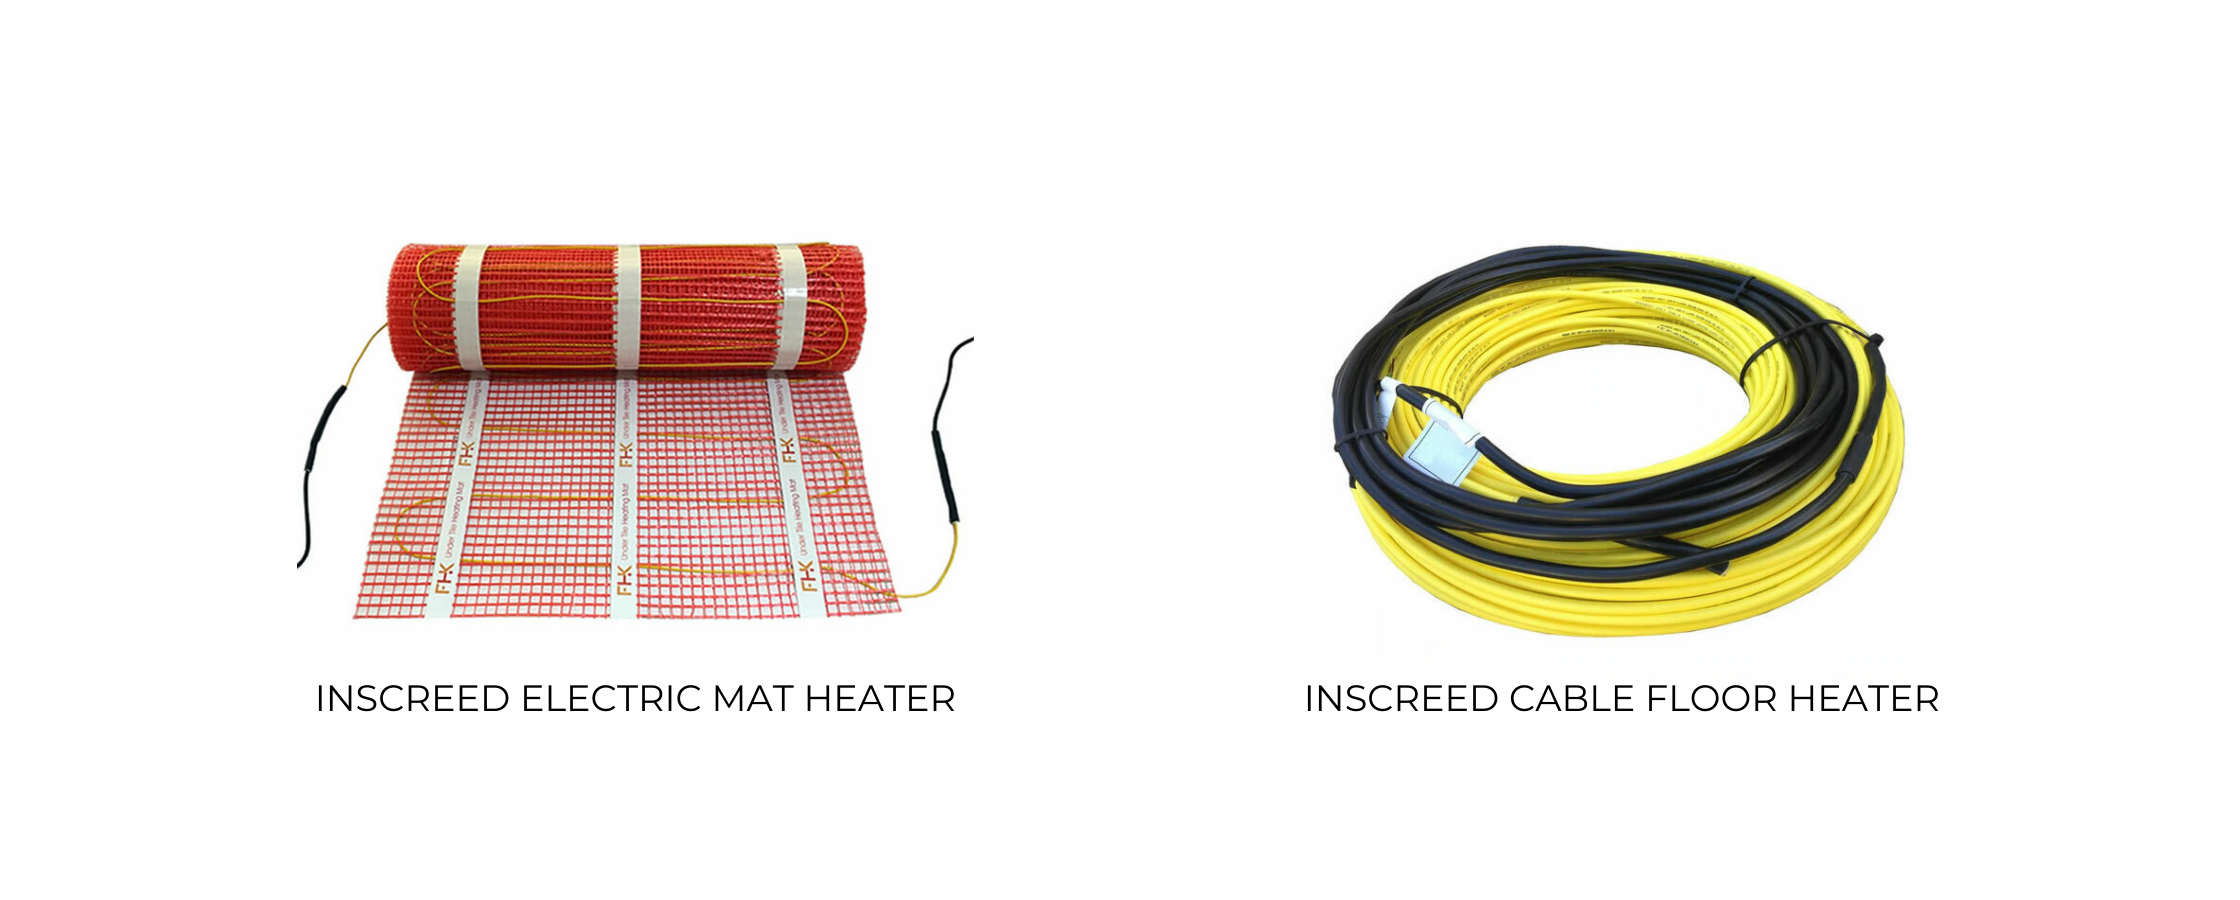 inscreed-mat-and-cable-floor-heater-examples.png